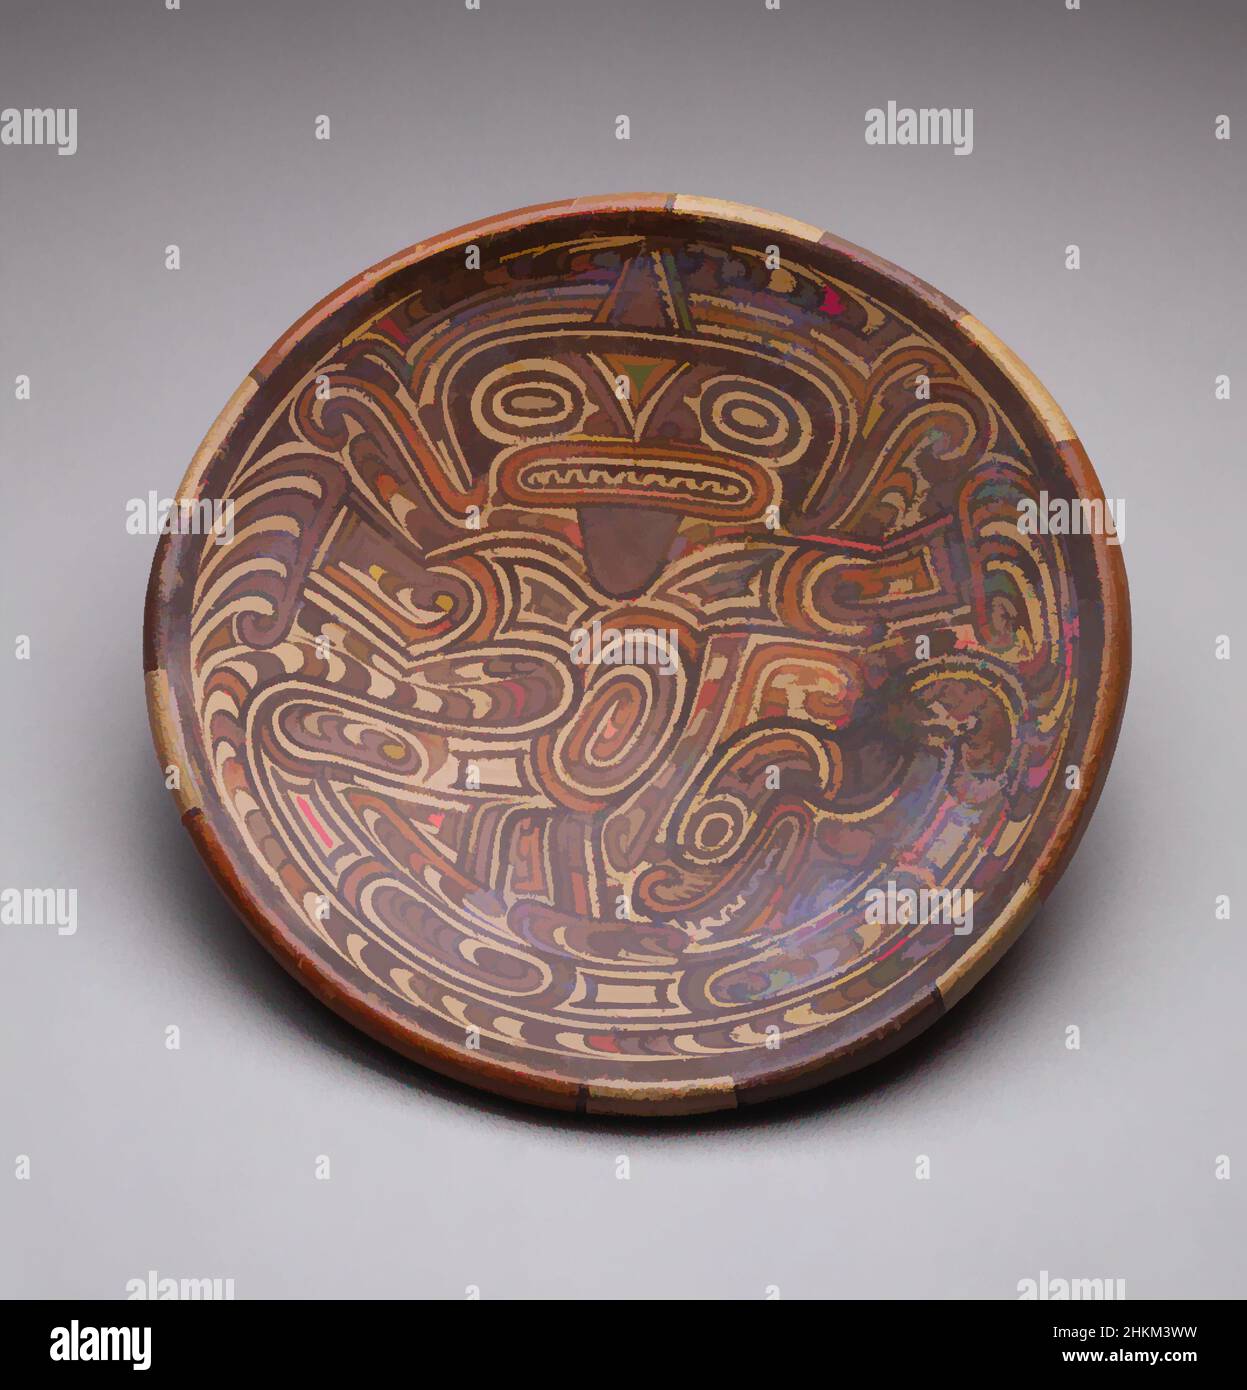 Art inspired by Plate with Painted Motifs, Coclé, c.1300-1500, Ceramic with pigment, Made in Panamá, North and Central America, Ceramics, containers, 2 3/8 x 11 in. (6 x 28 cm, Classic works modernized by Artotop with a splash of modernity. Shapes, color and value, eye-catching visual impact on art. Emotions through freedom of artworks in a contemporary way. A timeless message pursuing a wildly creative new direction. Artists turning to the digital medium and creating the Artotop NFT Stock Photo